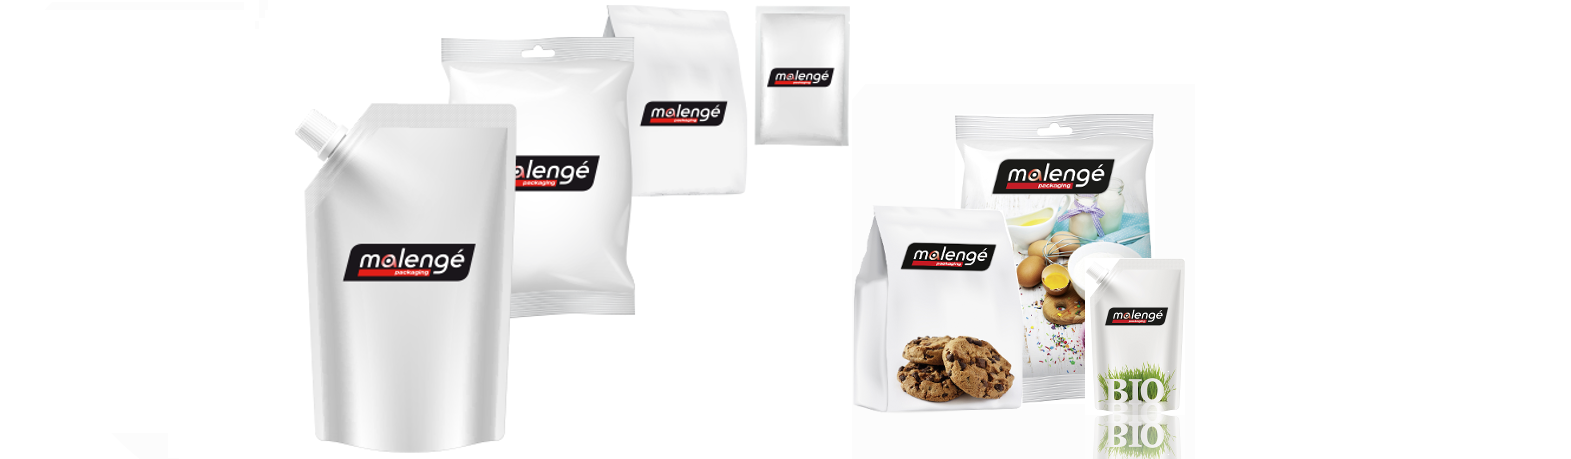 Malengé Packaging